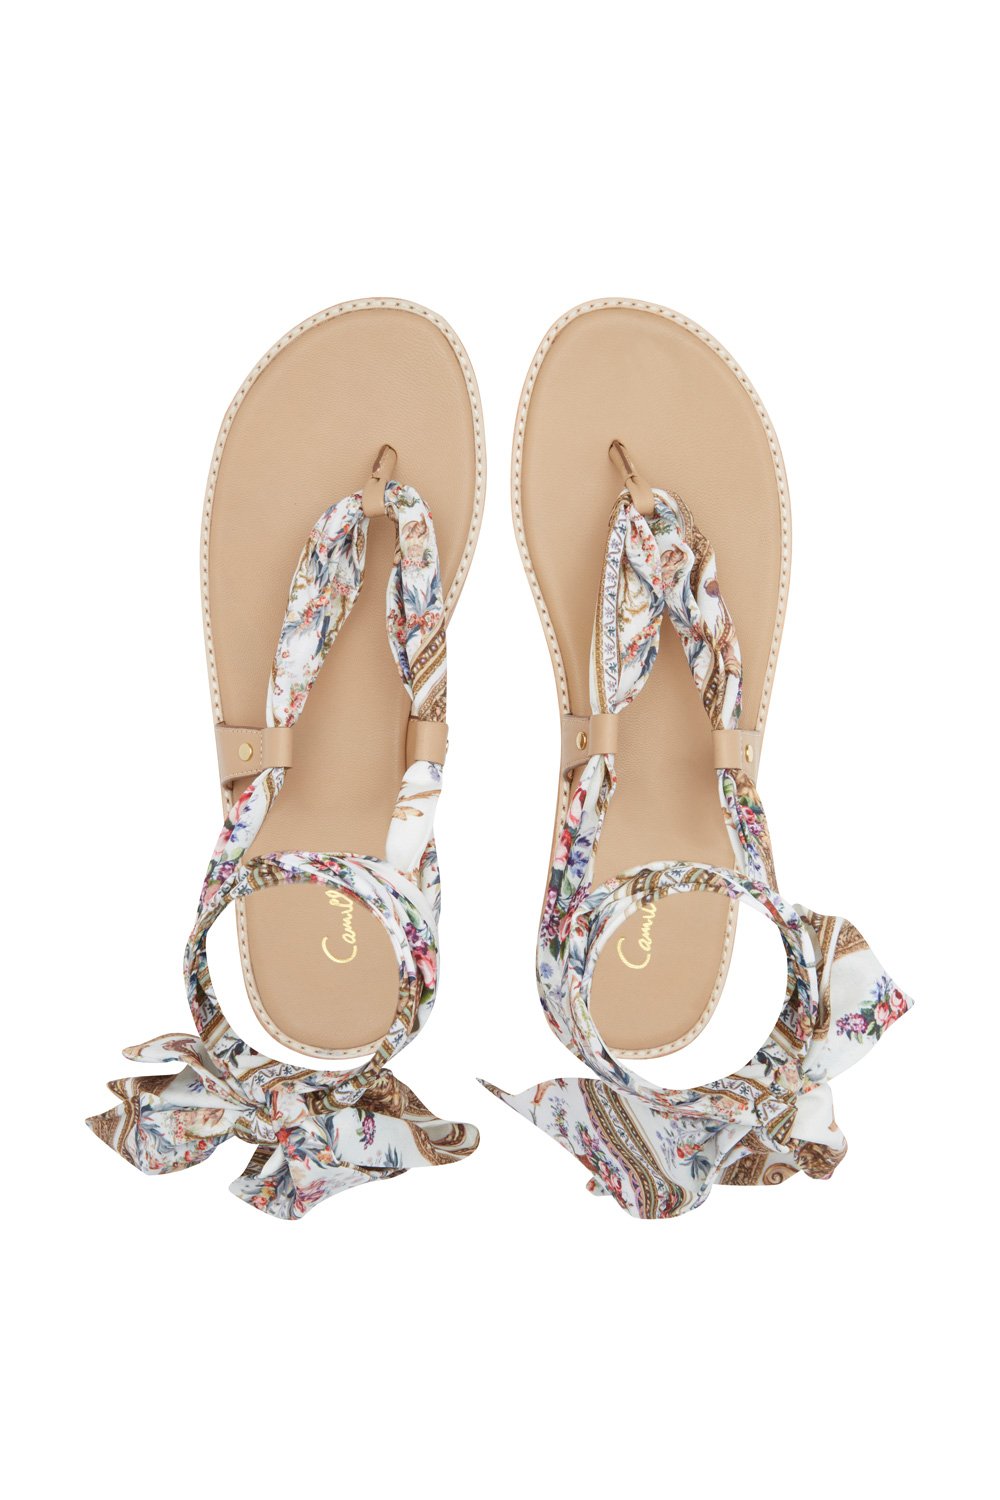 FABRIC TIE SANDAL OLYMPE ODE